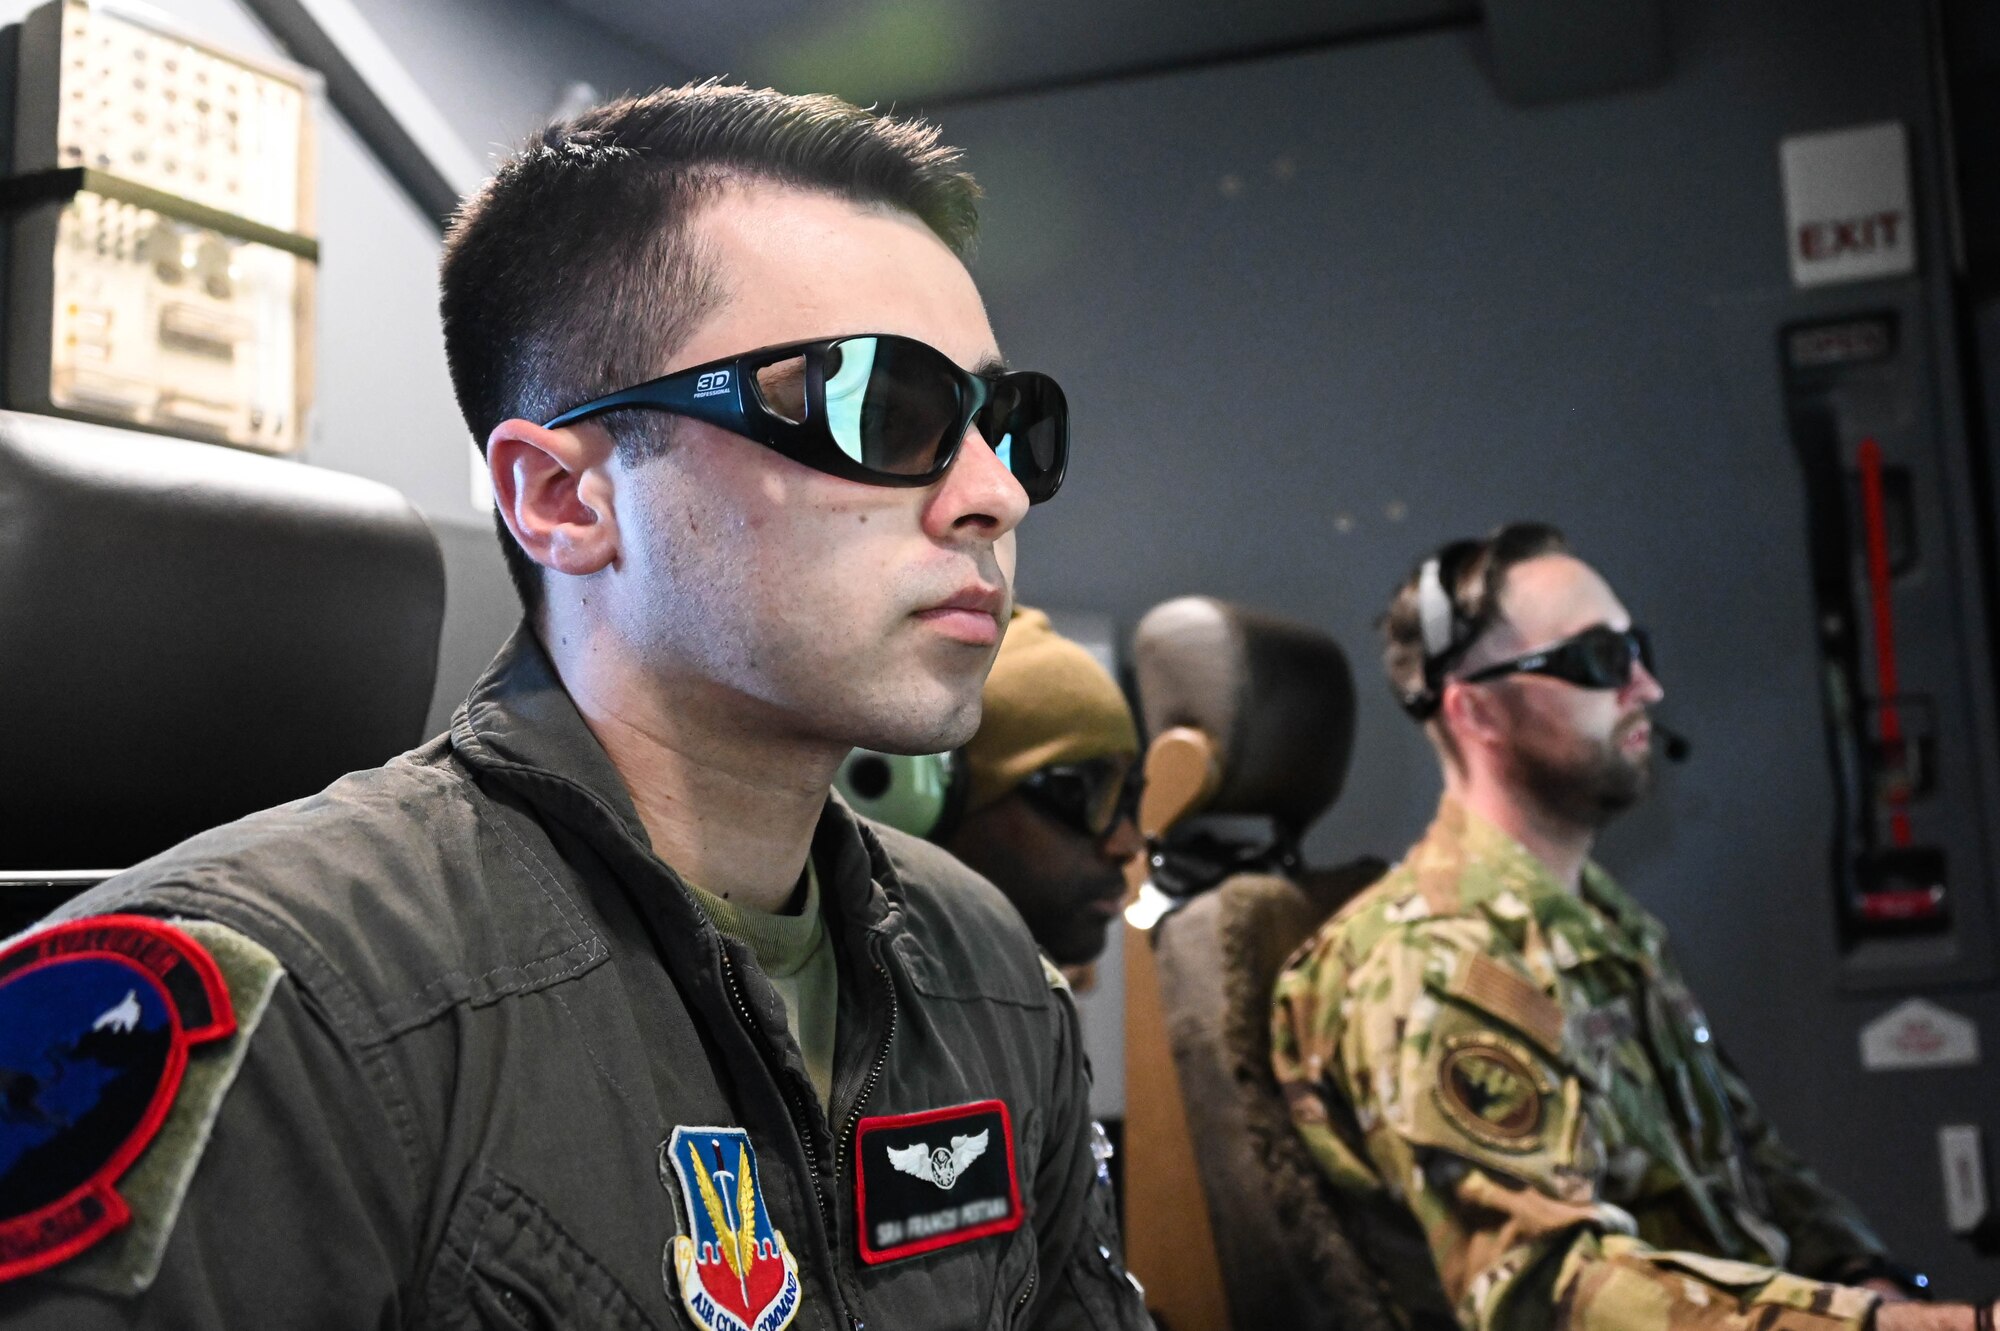 From left, U.S. Air Force Senior Airman Francis, 432nd Air Expeditionary Wing (AEW) evaluator sensor operator, Tech. Sgt. Marcus, 432nd AEW evaluator sensor operator, watch Tech. Sgt. Ian Sweaney, 56th Air Refueling Squadron evaluator boom operator, refuel a KC-135 Stratotanker, March 10, 2022. Sensor operators remotely control aircraft to gather intelligence and surveillance. (U.S. Air Force photo by Senior Airman Kayla Christenson)